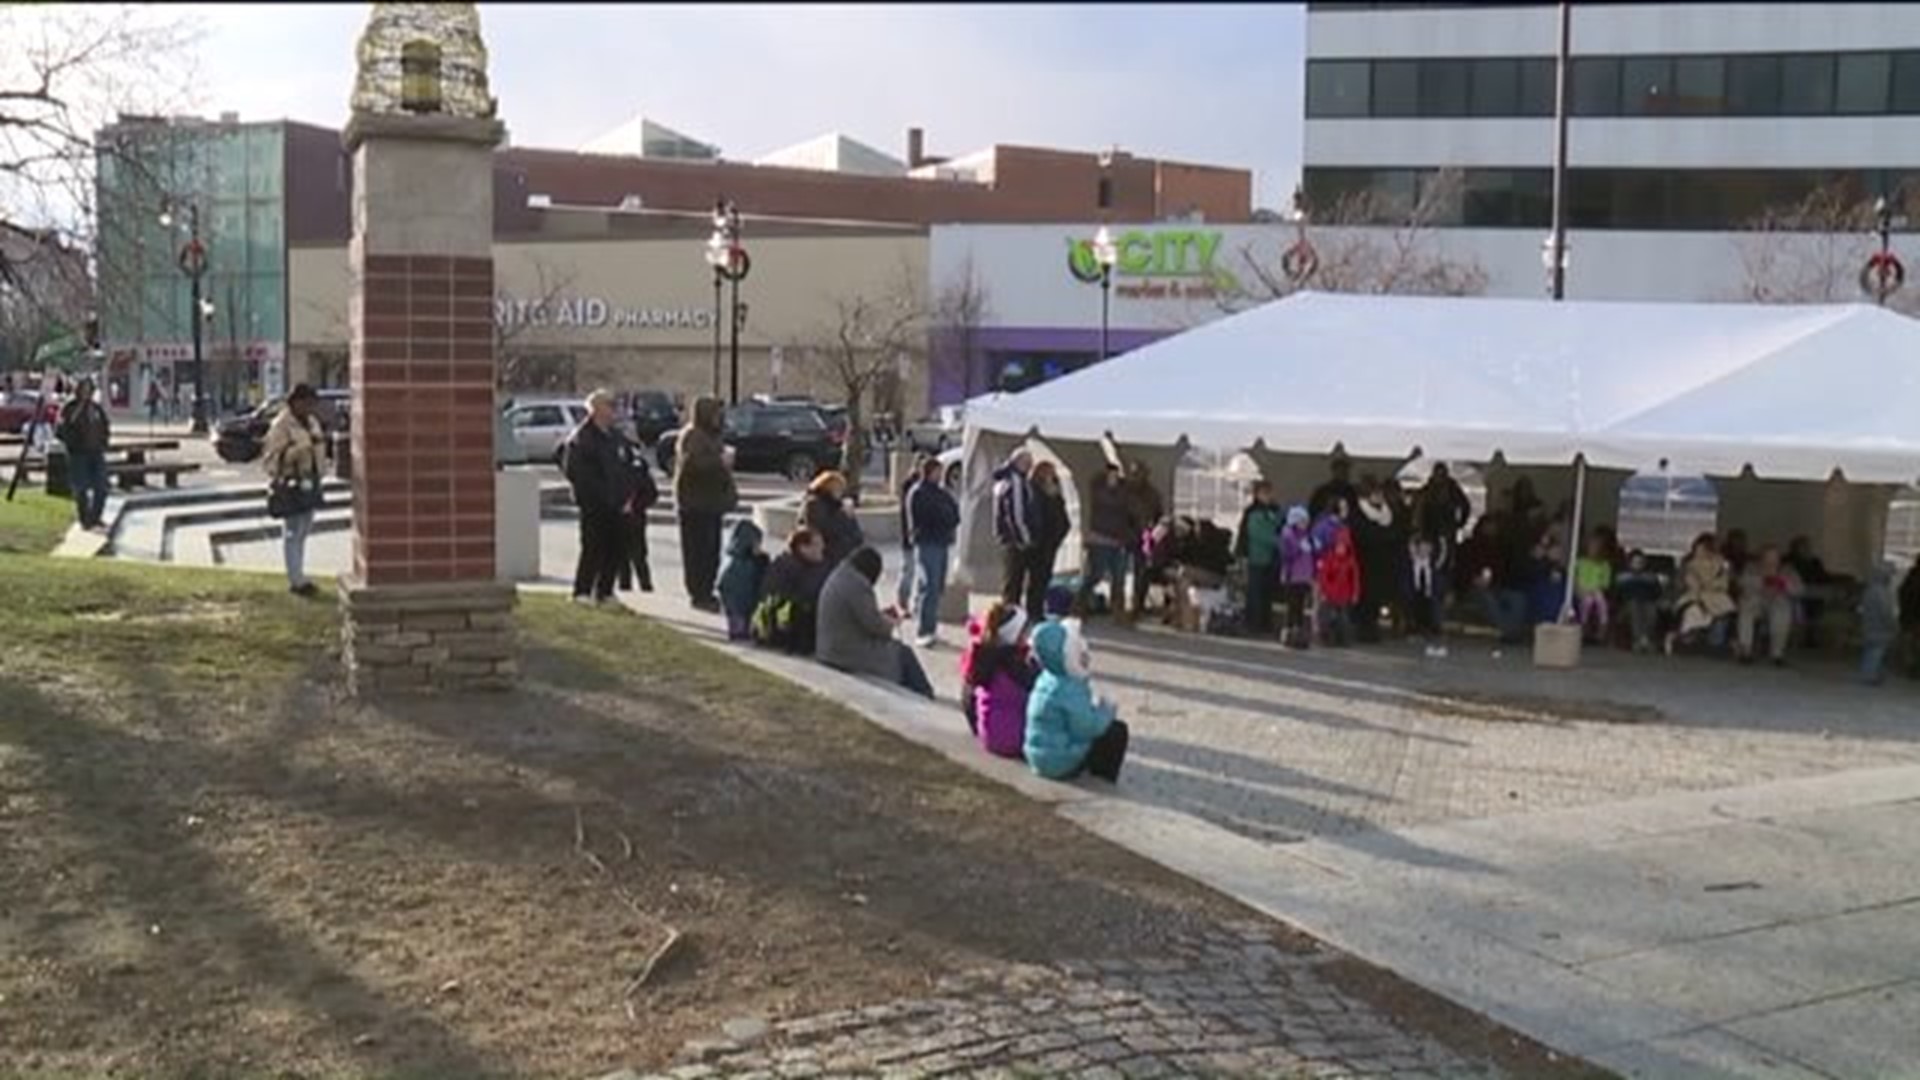 Church on the Square Hosts Annual Christmas Party for Homeless